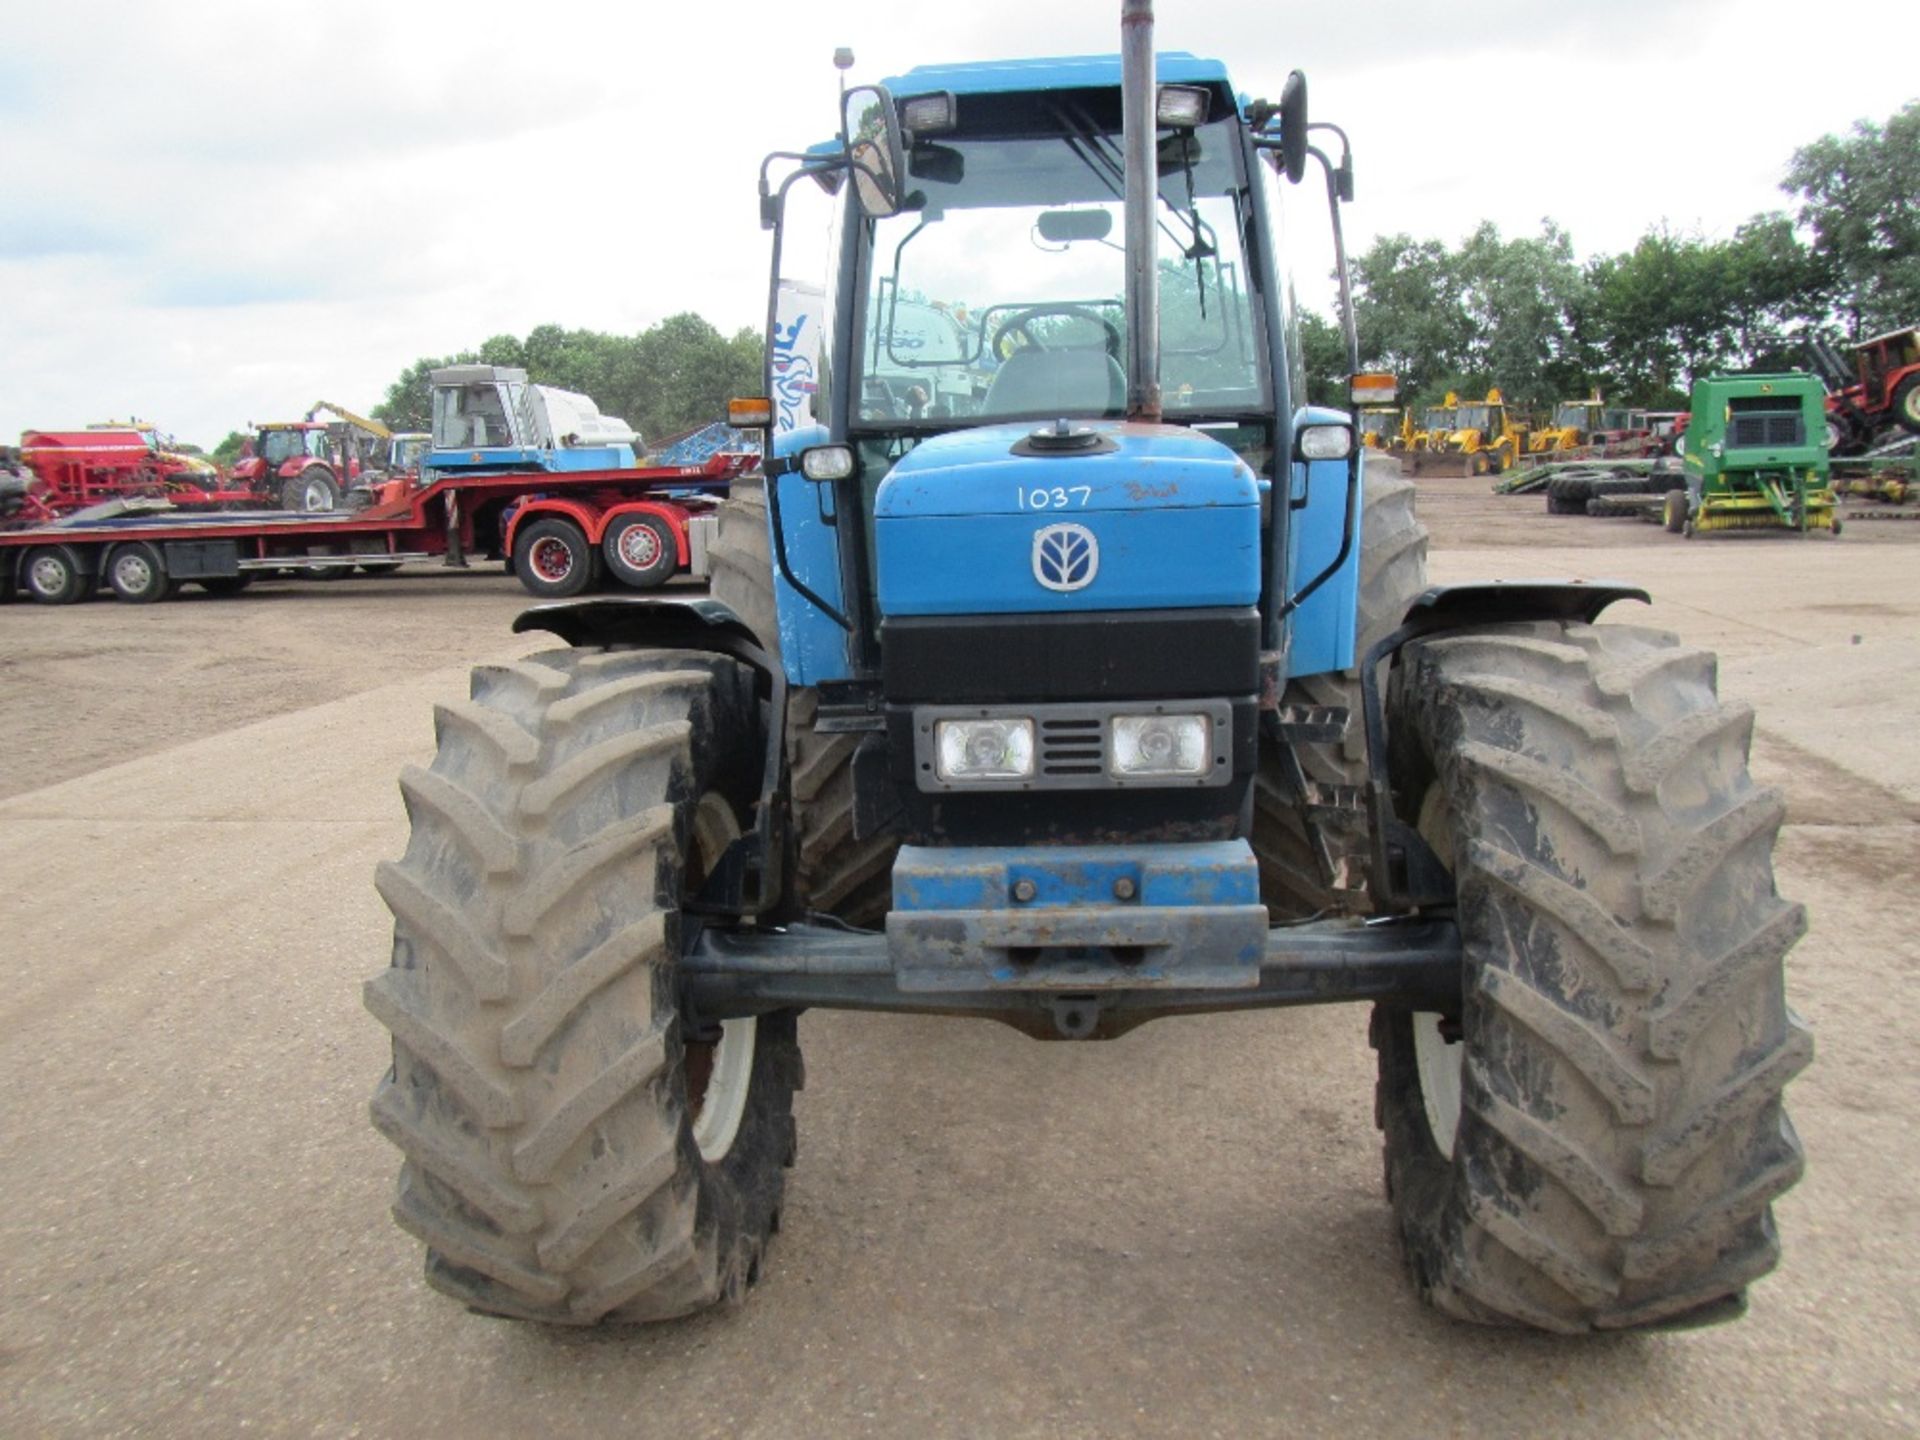 New Holland 8340 SLE 4wd Tractor Reg. No. N243 SCN Ser. No. 025324B - Image 19 of 20